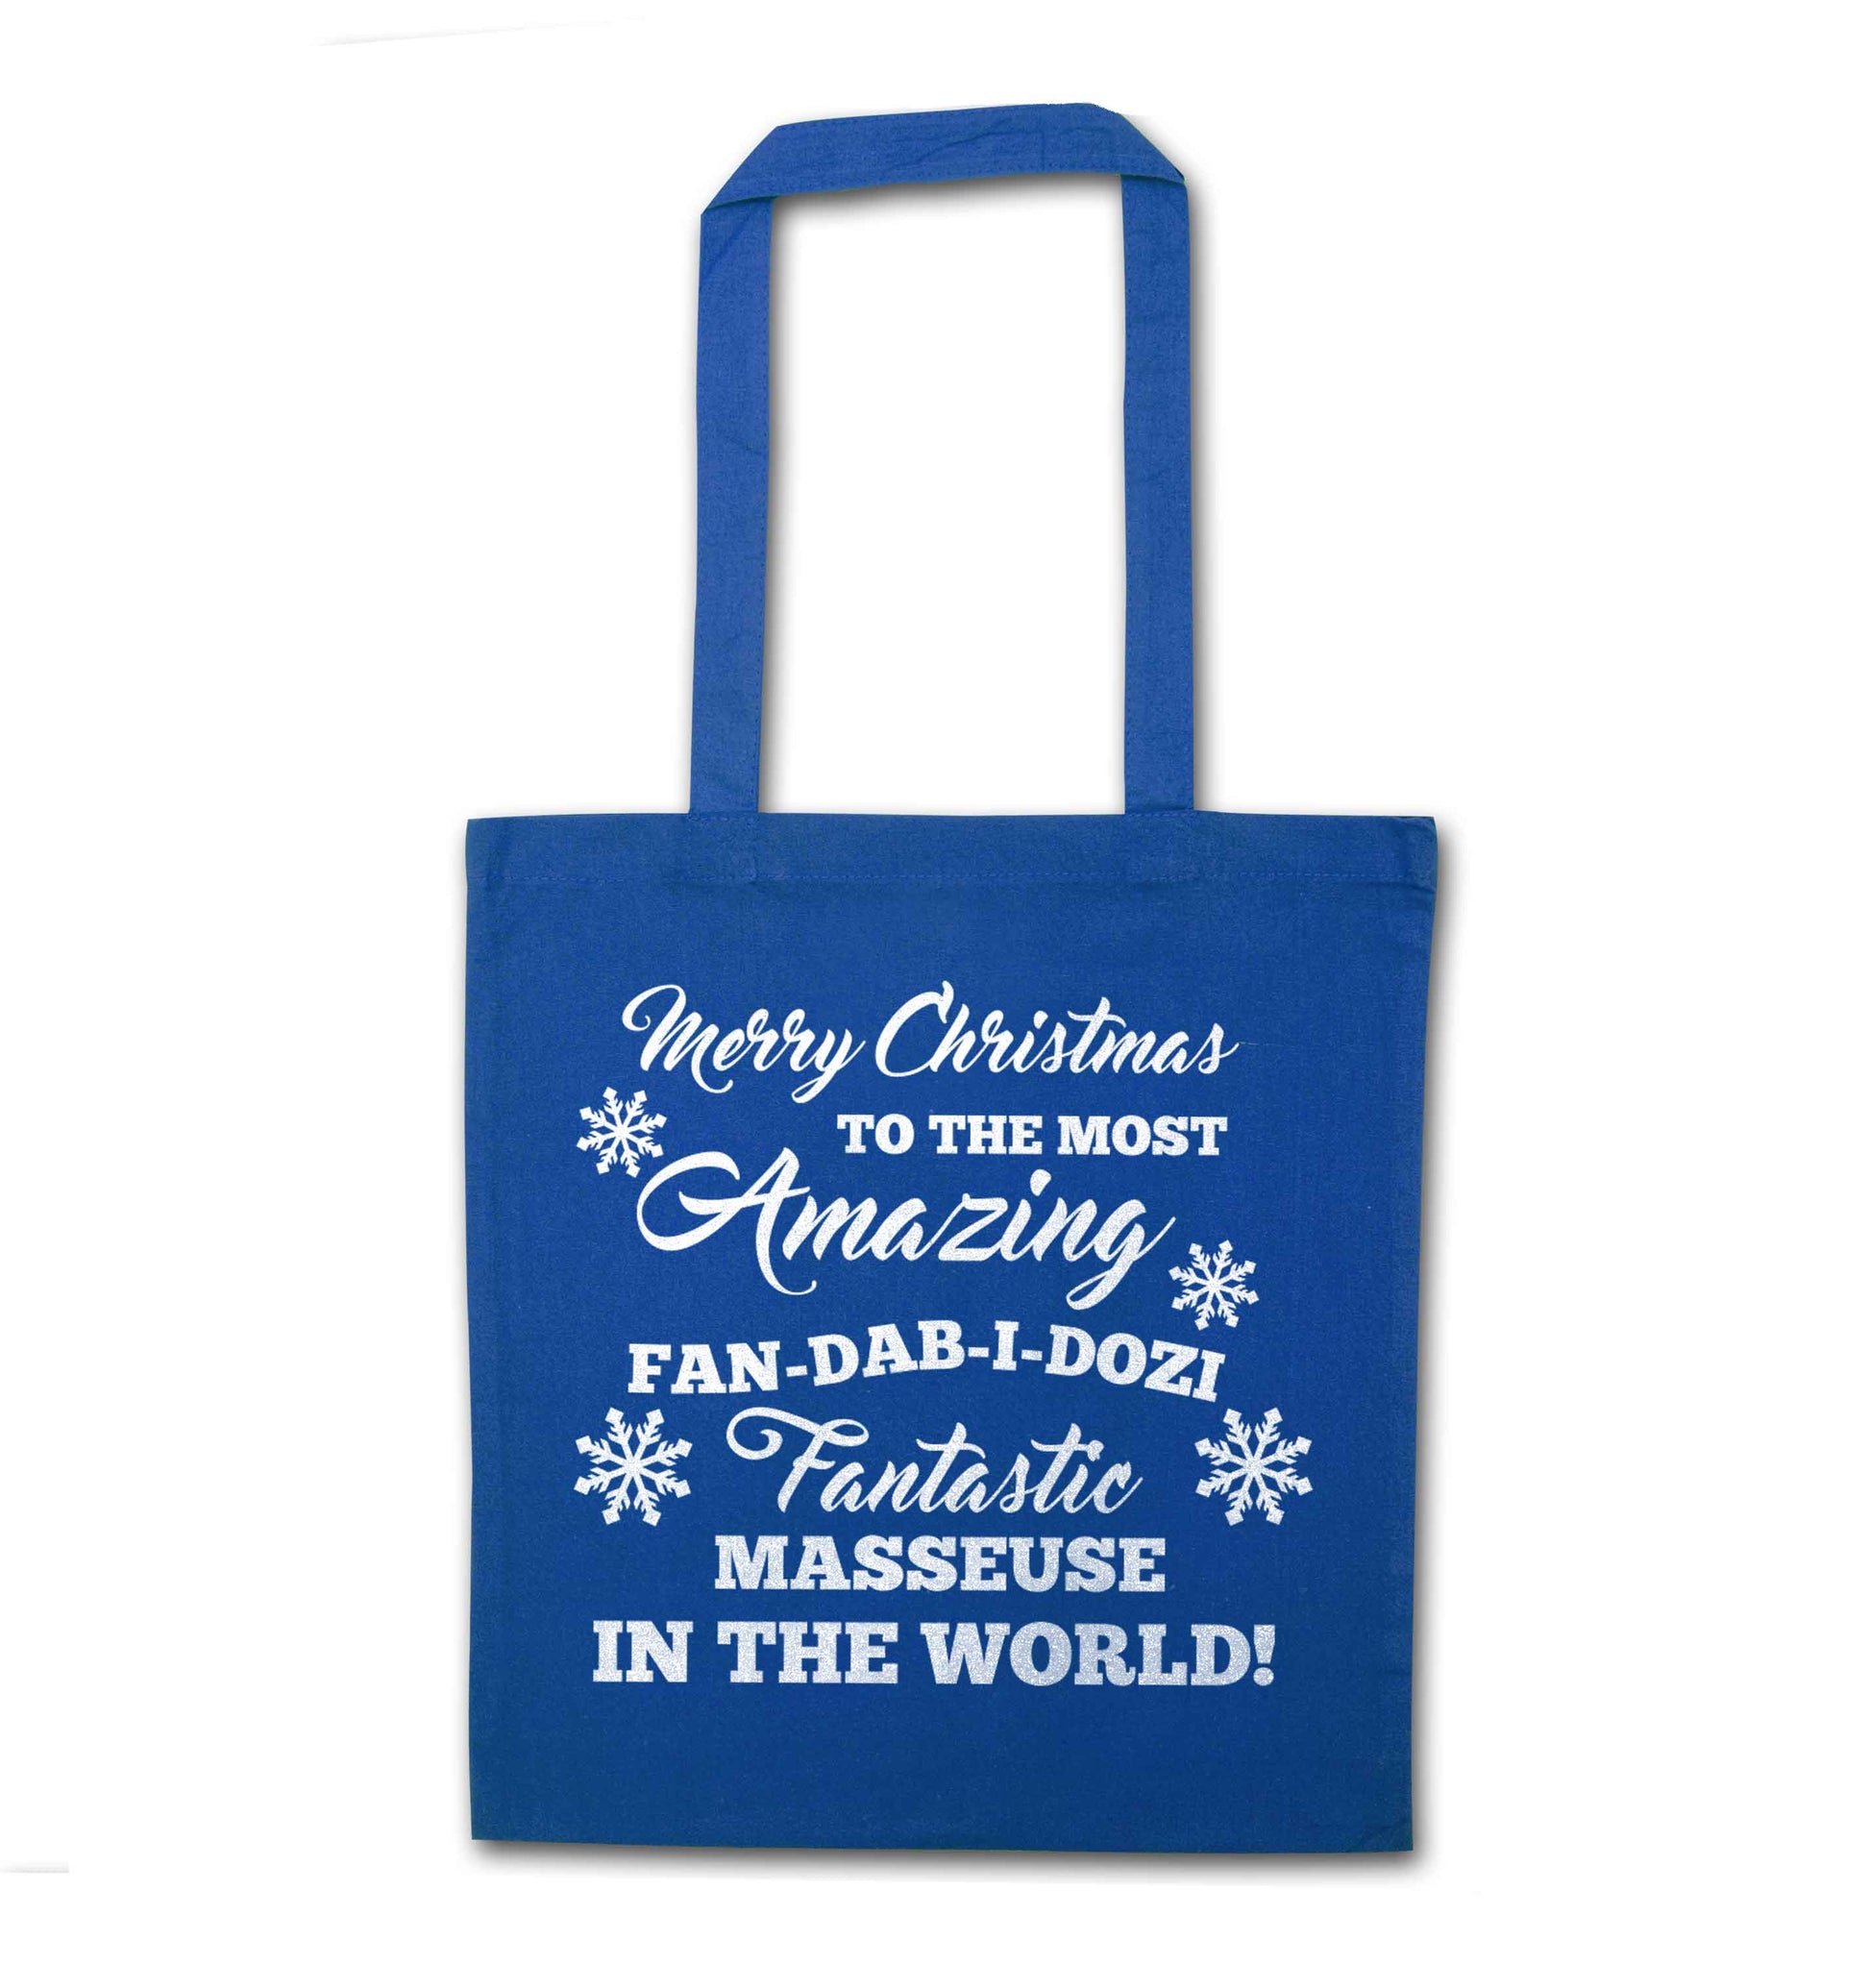 Merry Christmas to the most amazing fan-dab-i-dozi fantasic masseuse in the world blue tote bag